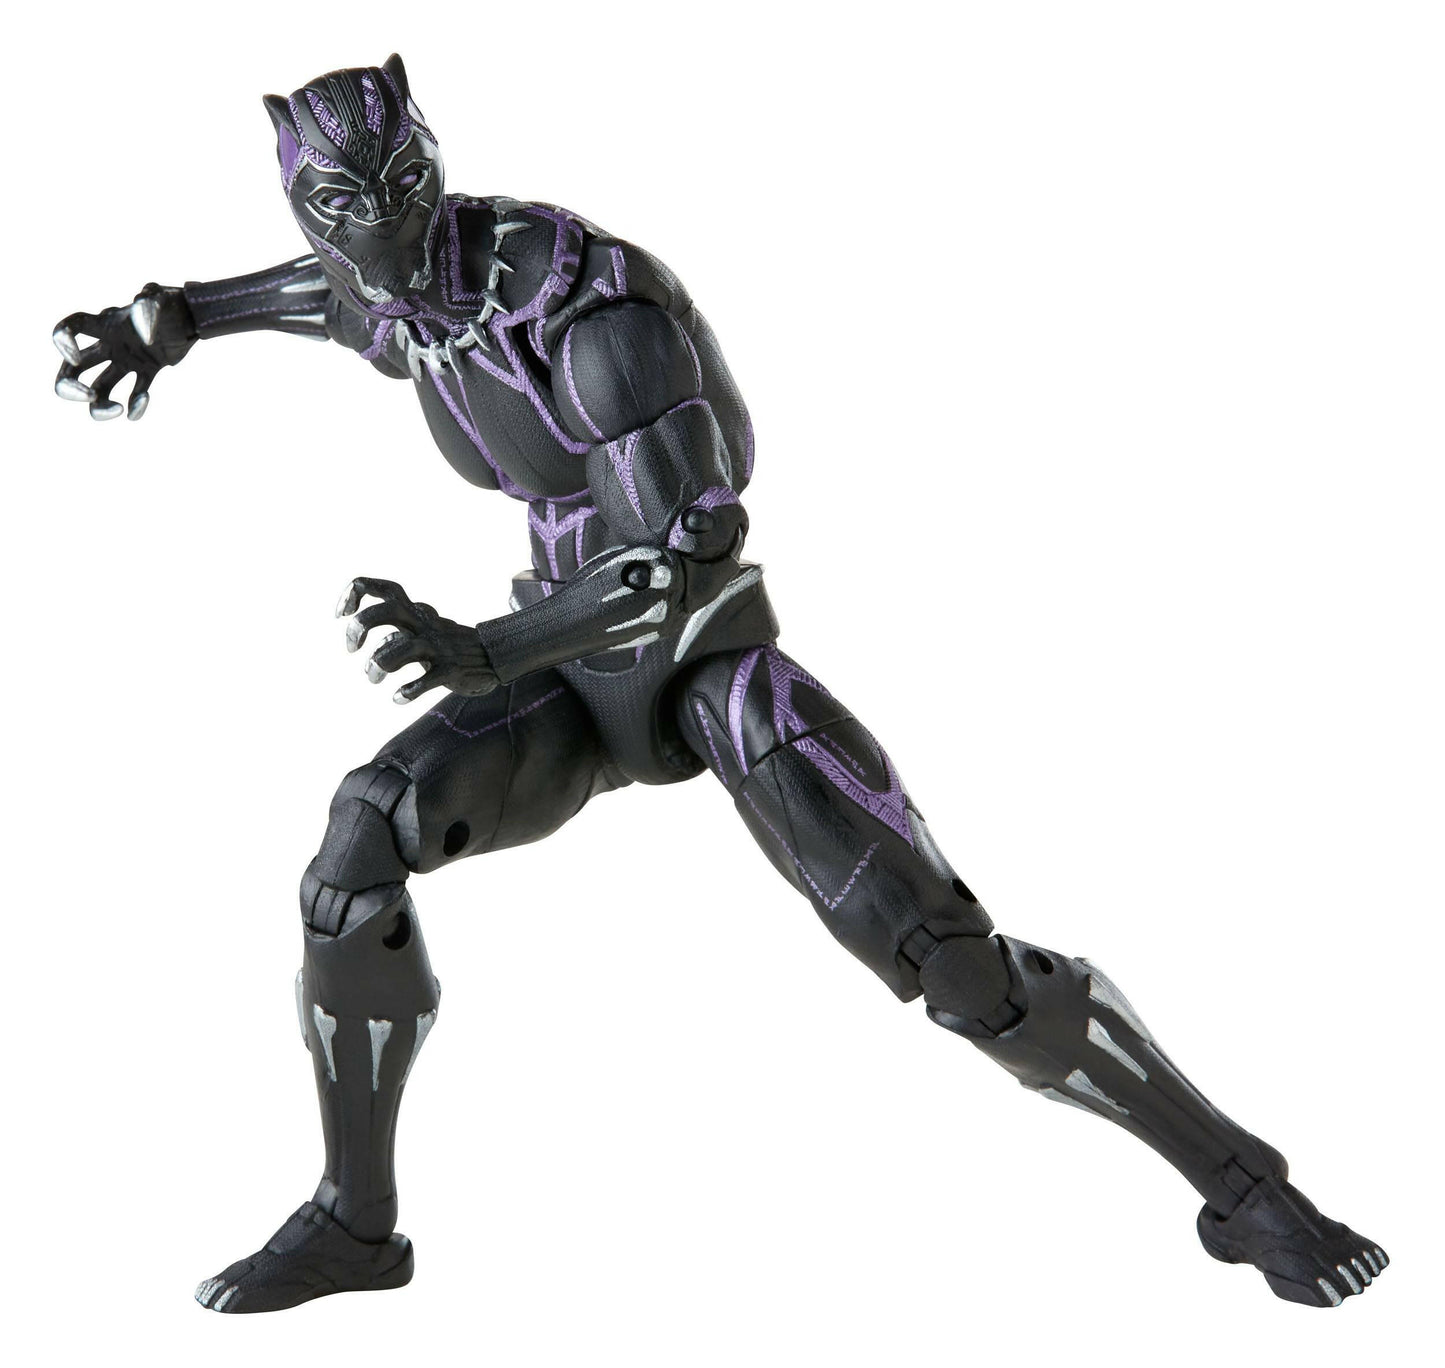 Marvel Legends Black Panther Legacy Collection Black Panther (Charged) 15cm Hasbro